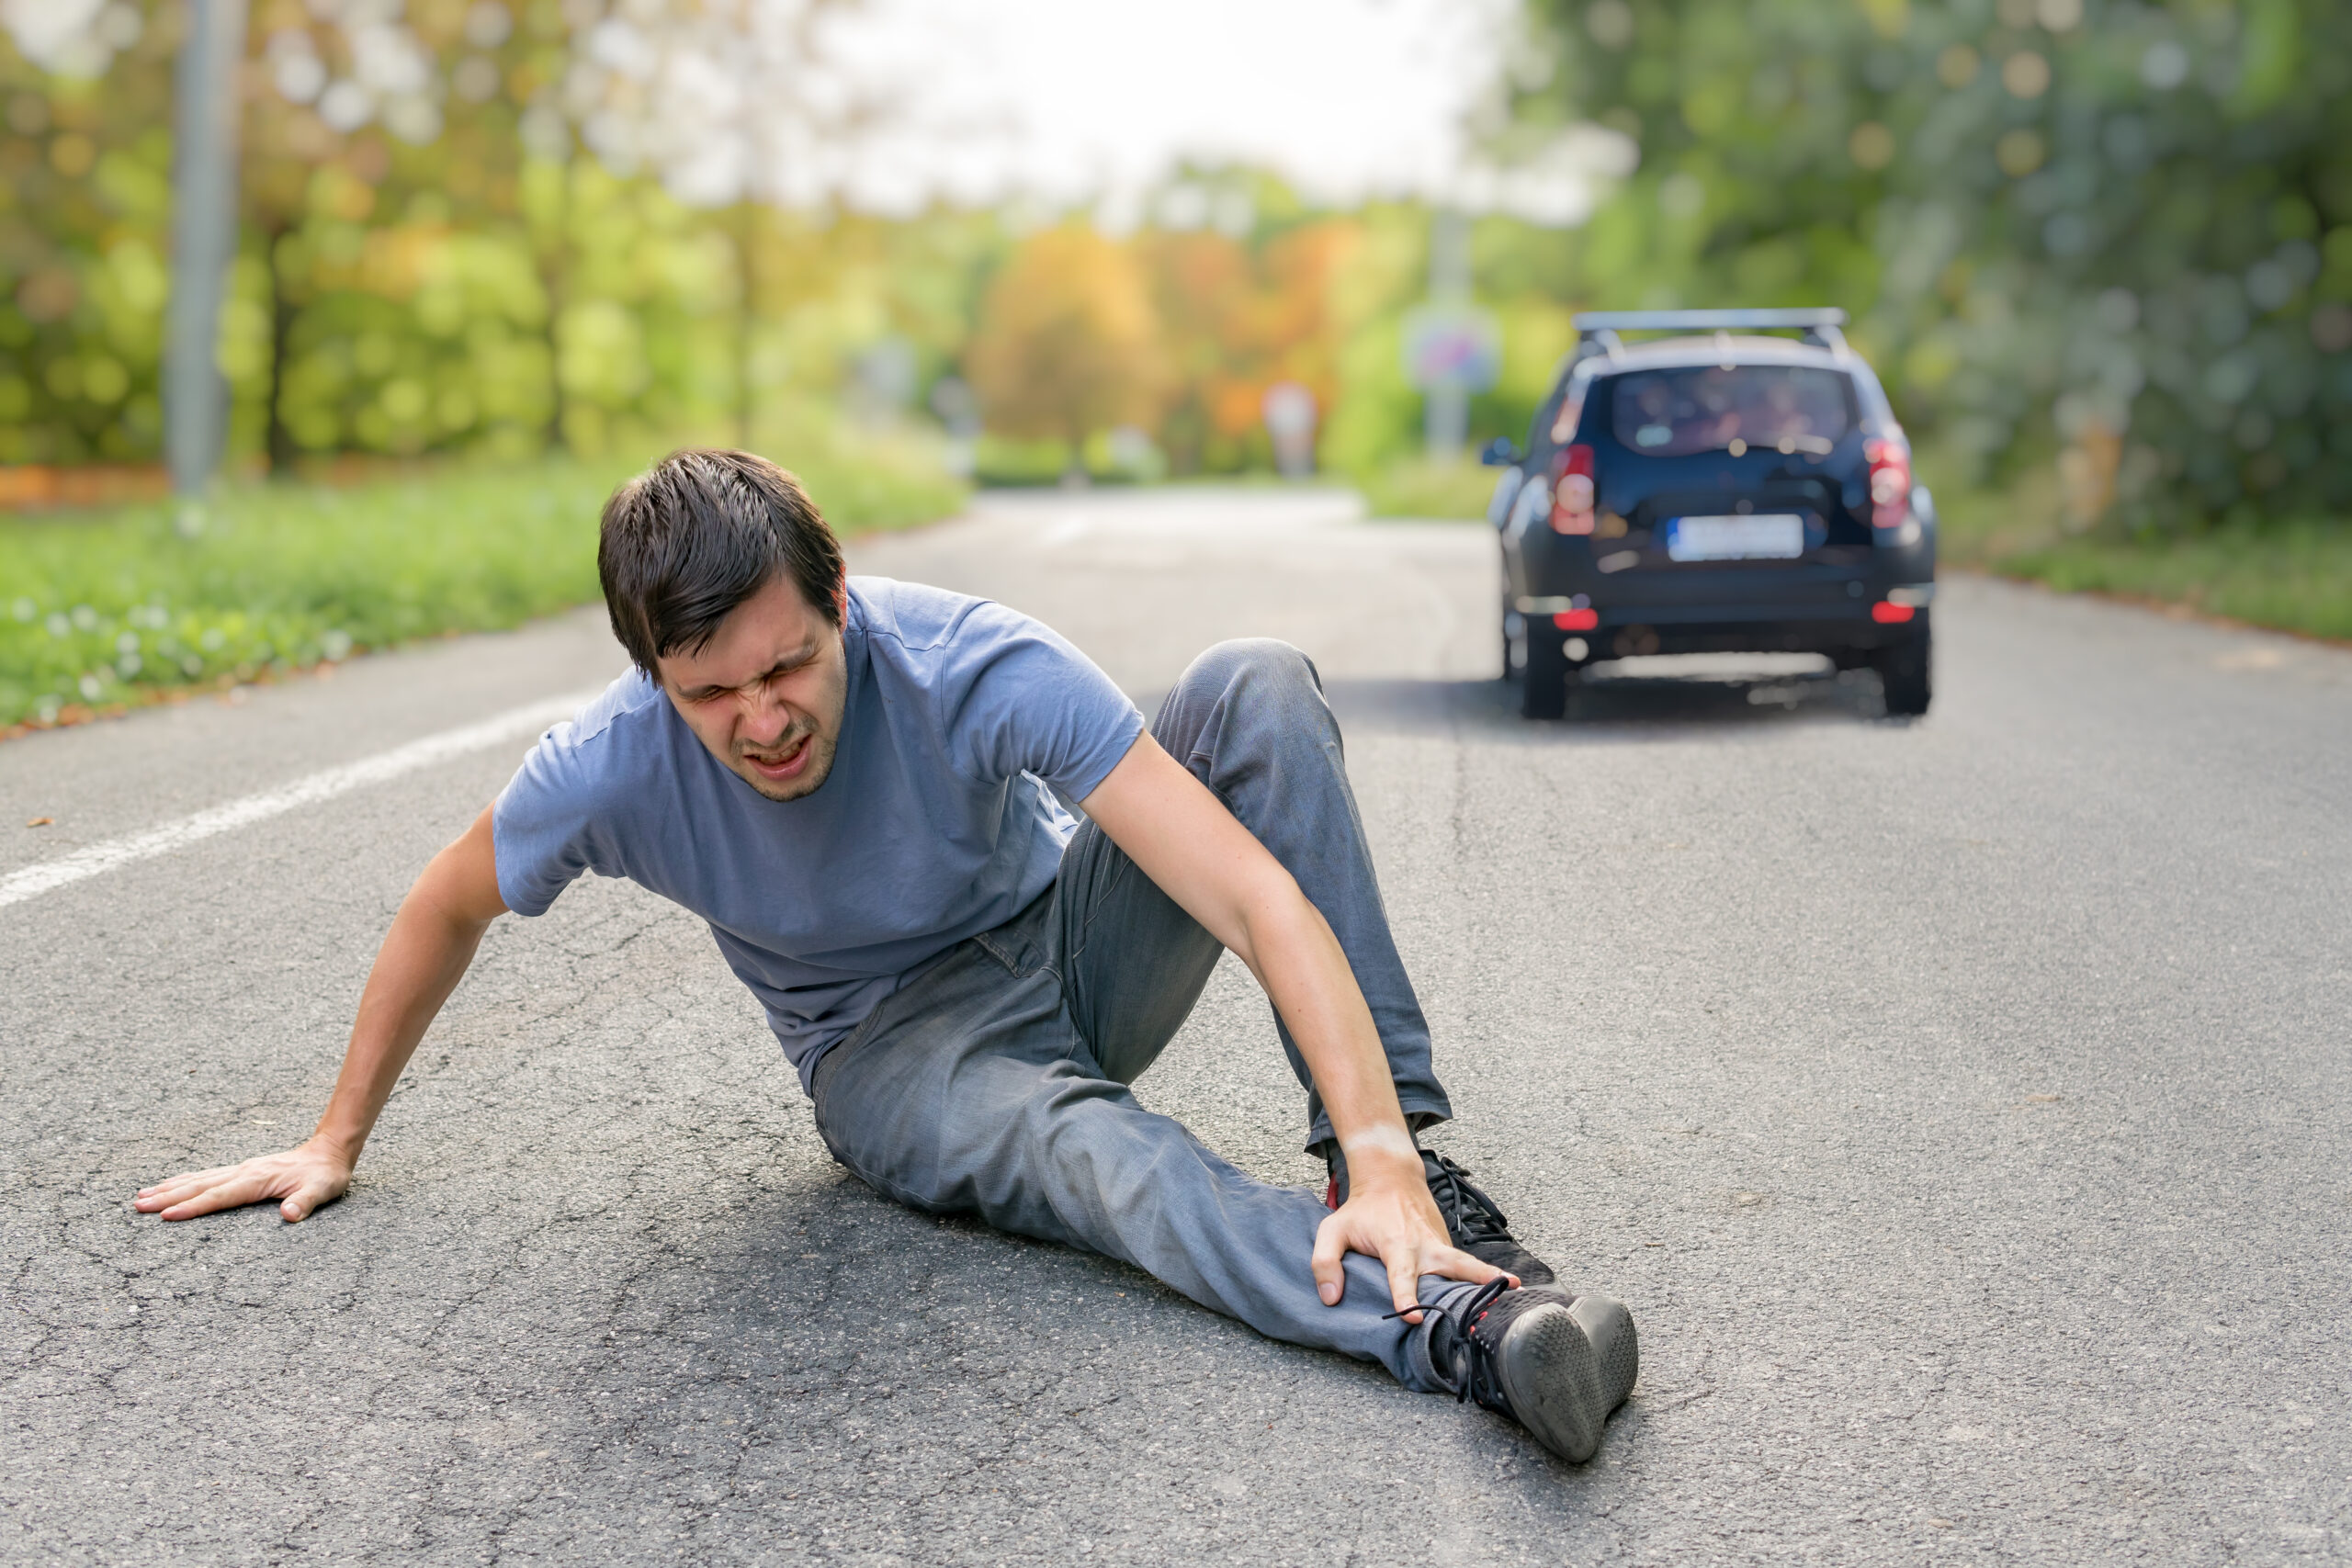 car-accident-lawyer-hit-and-run-houston